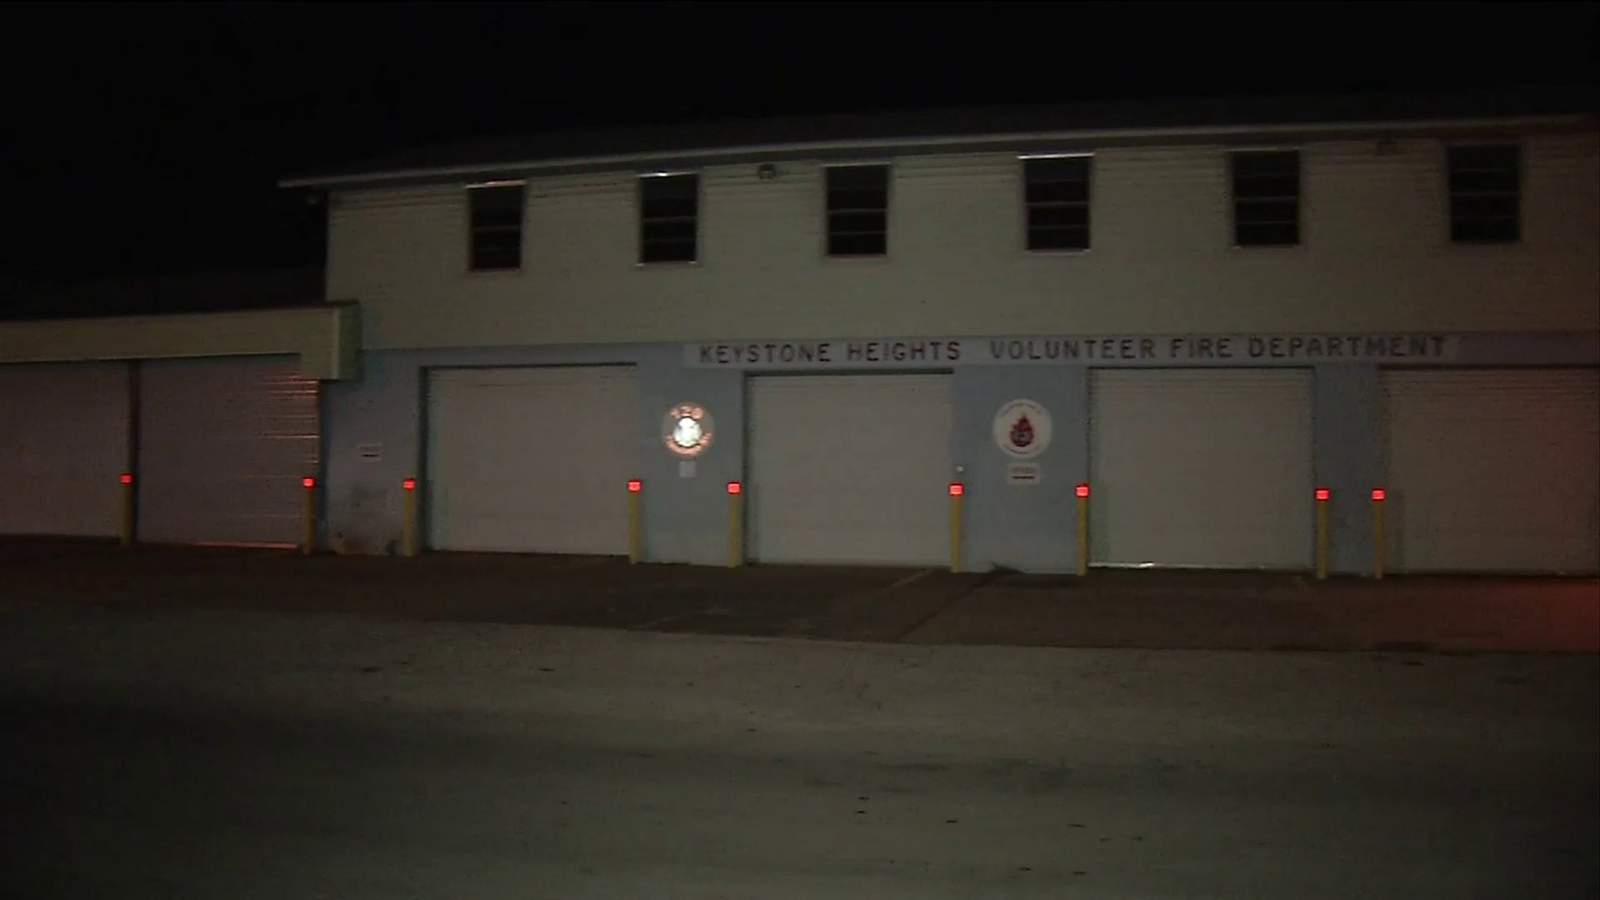 Plan would turn Keystone Heights fire station into Clay County Sheriff’s Office stop station